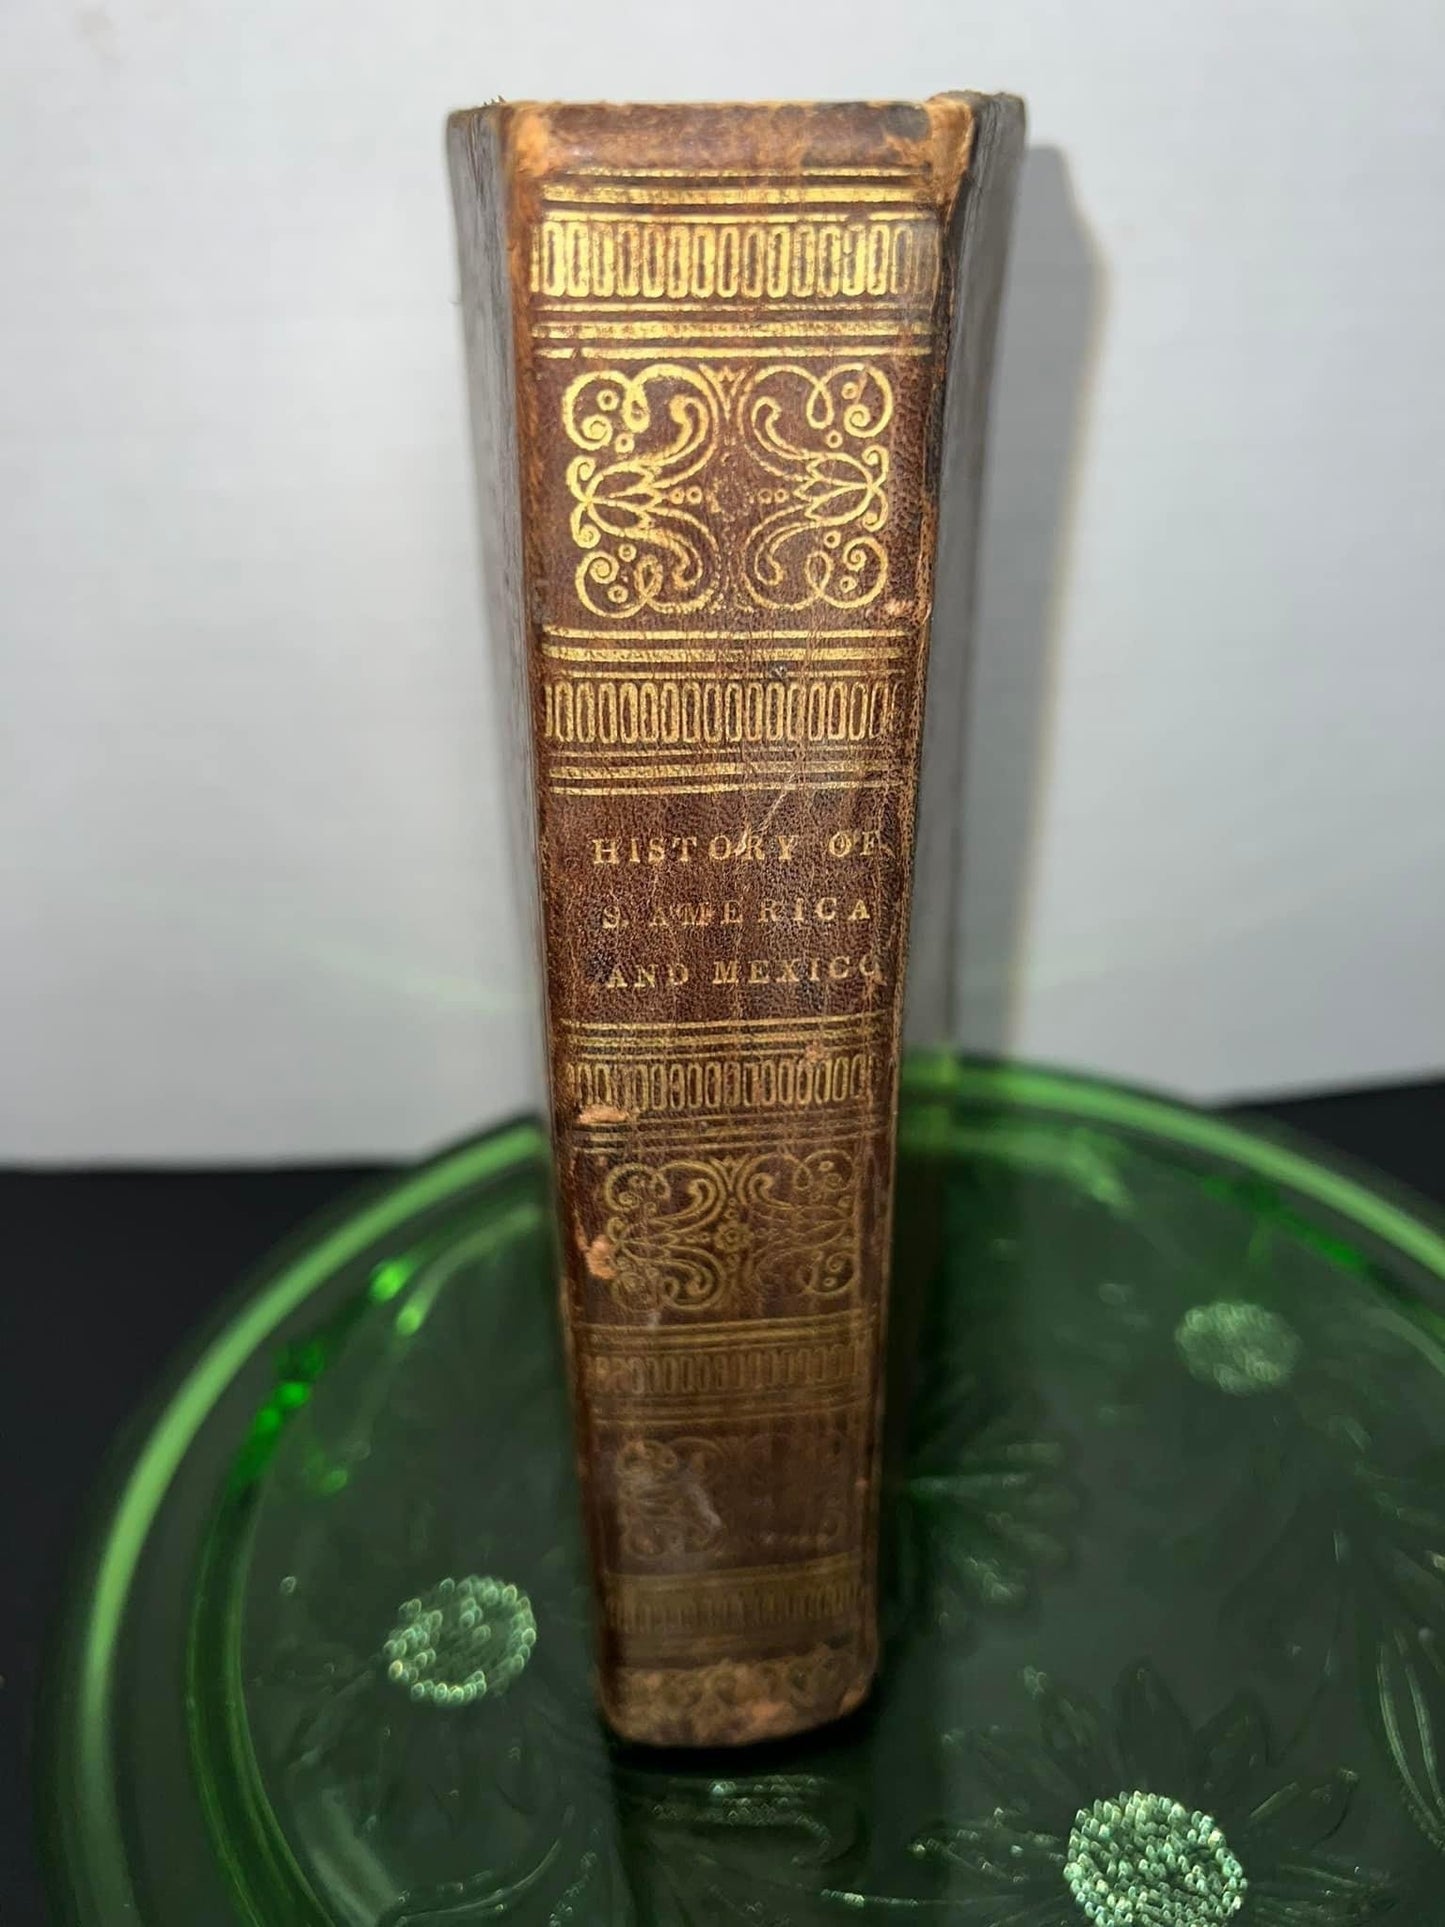 Antique Victorian exploration history 1825 A view of South America and Mexico